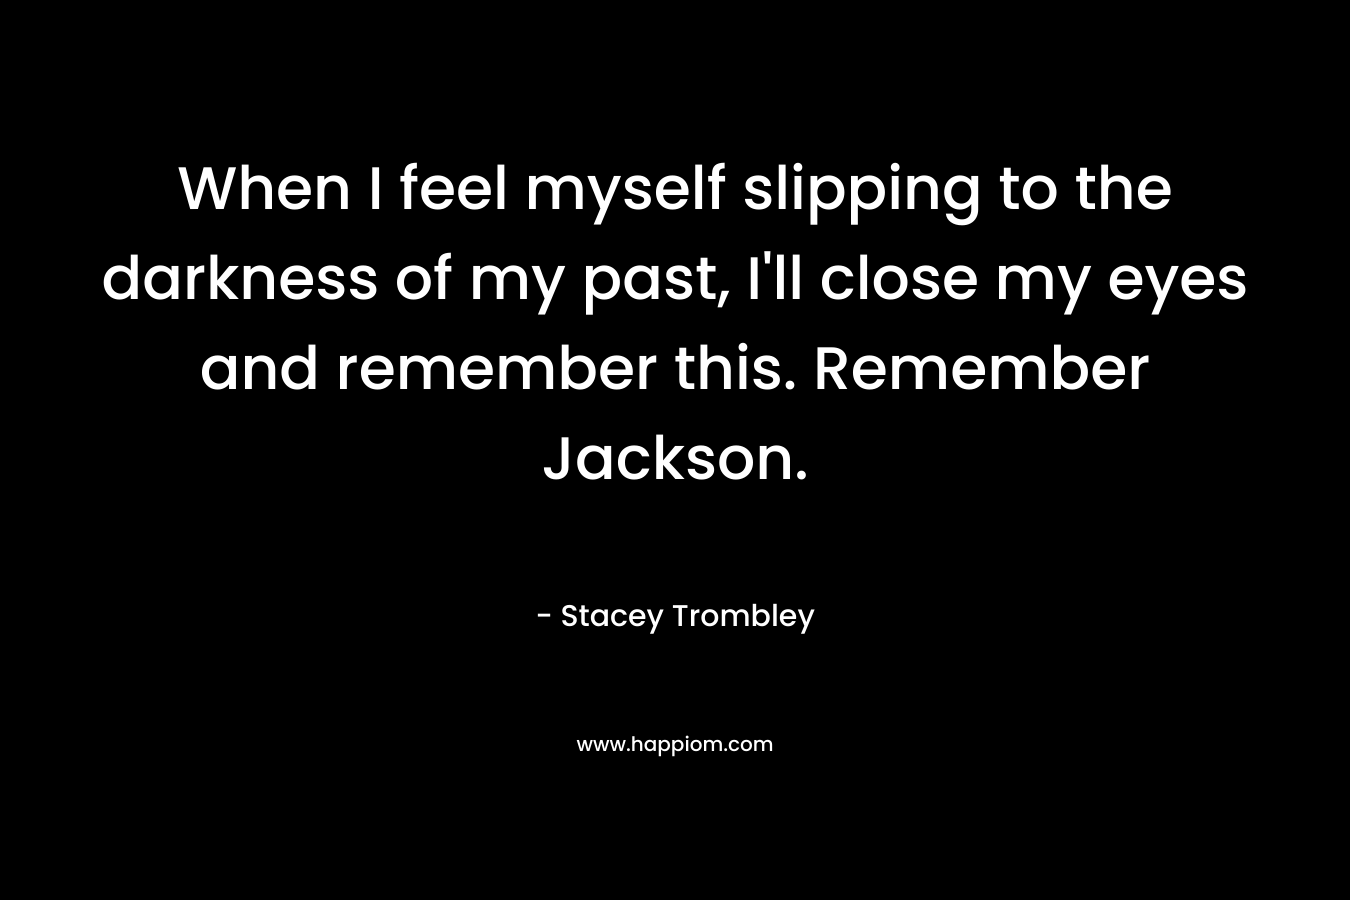 When I feel myself slipping to the darkness of my past, I’ll close my eyes and remember this. Remember Jackson. – Stacey Trombley